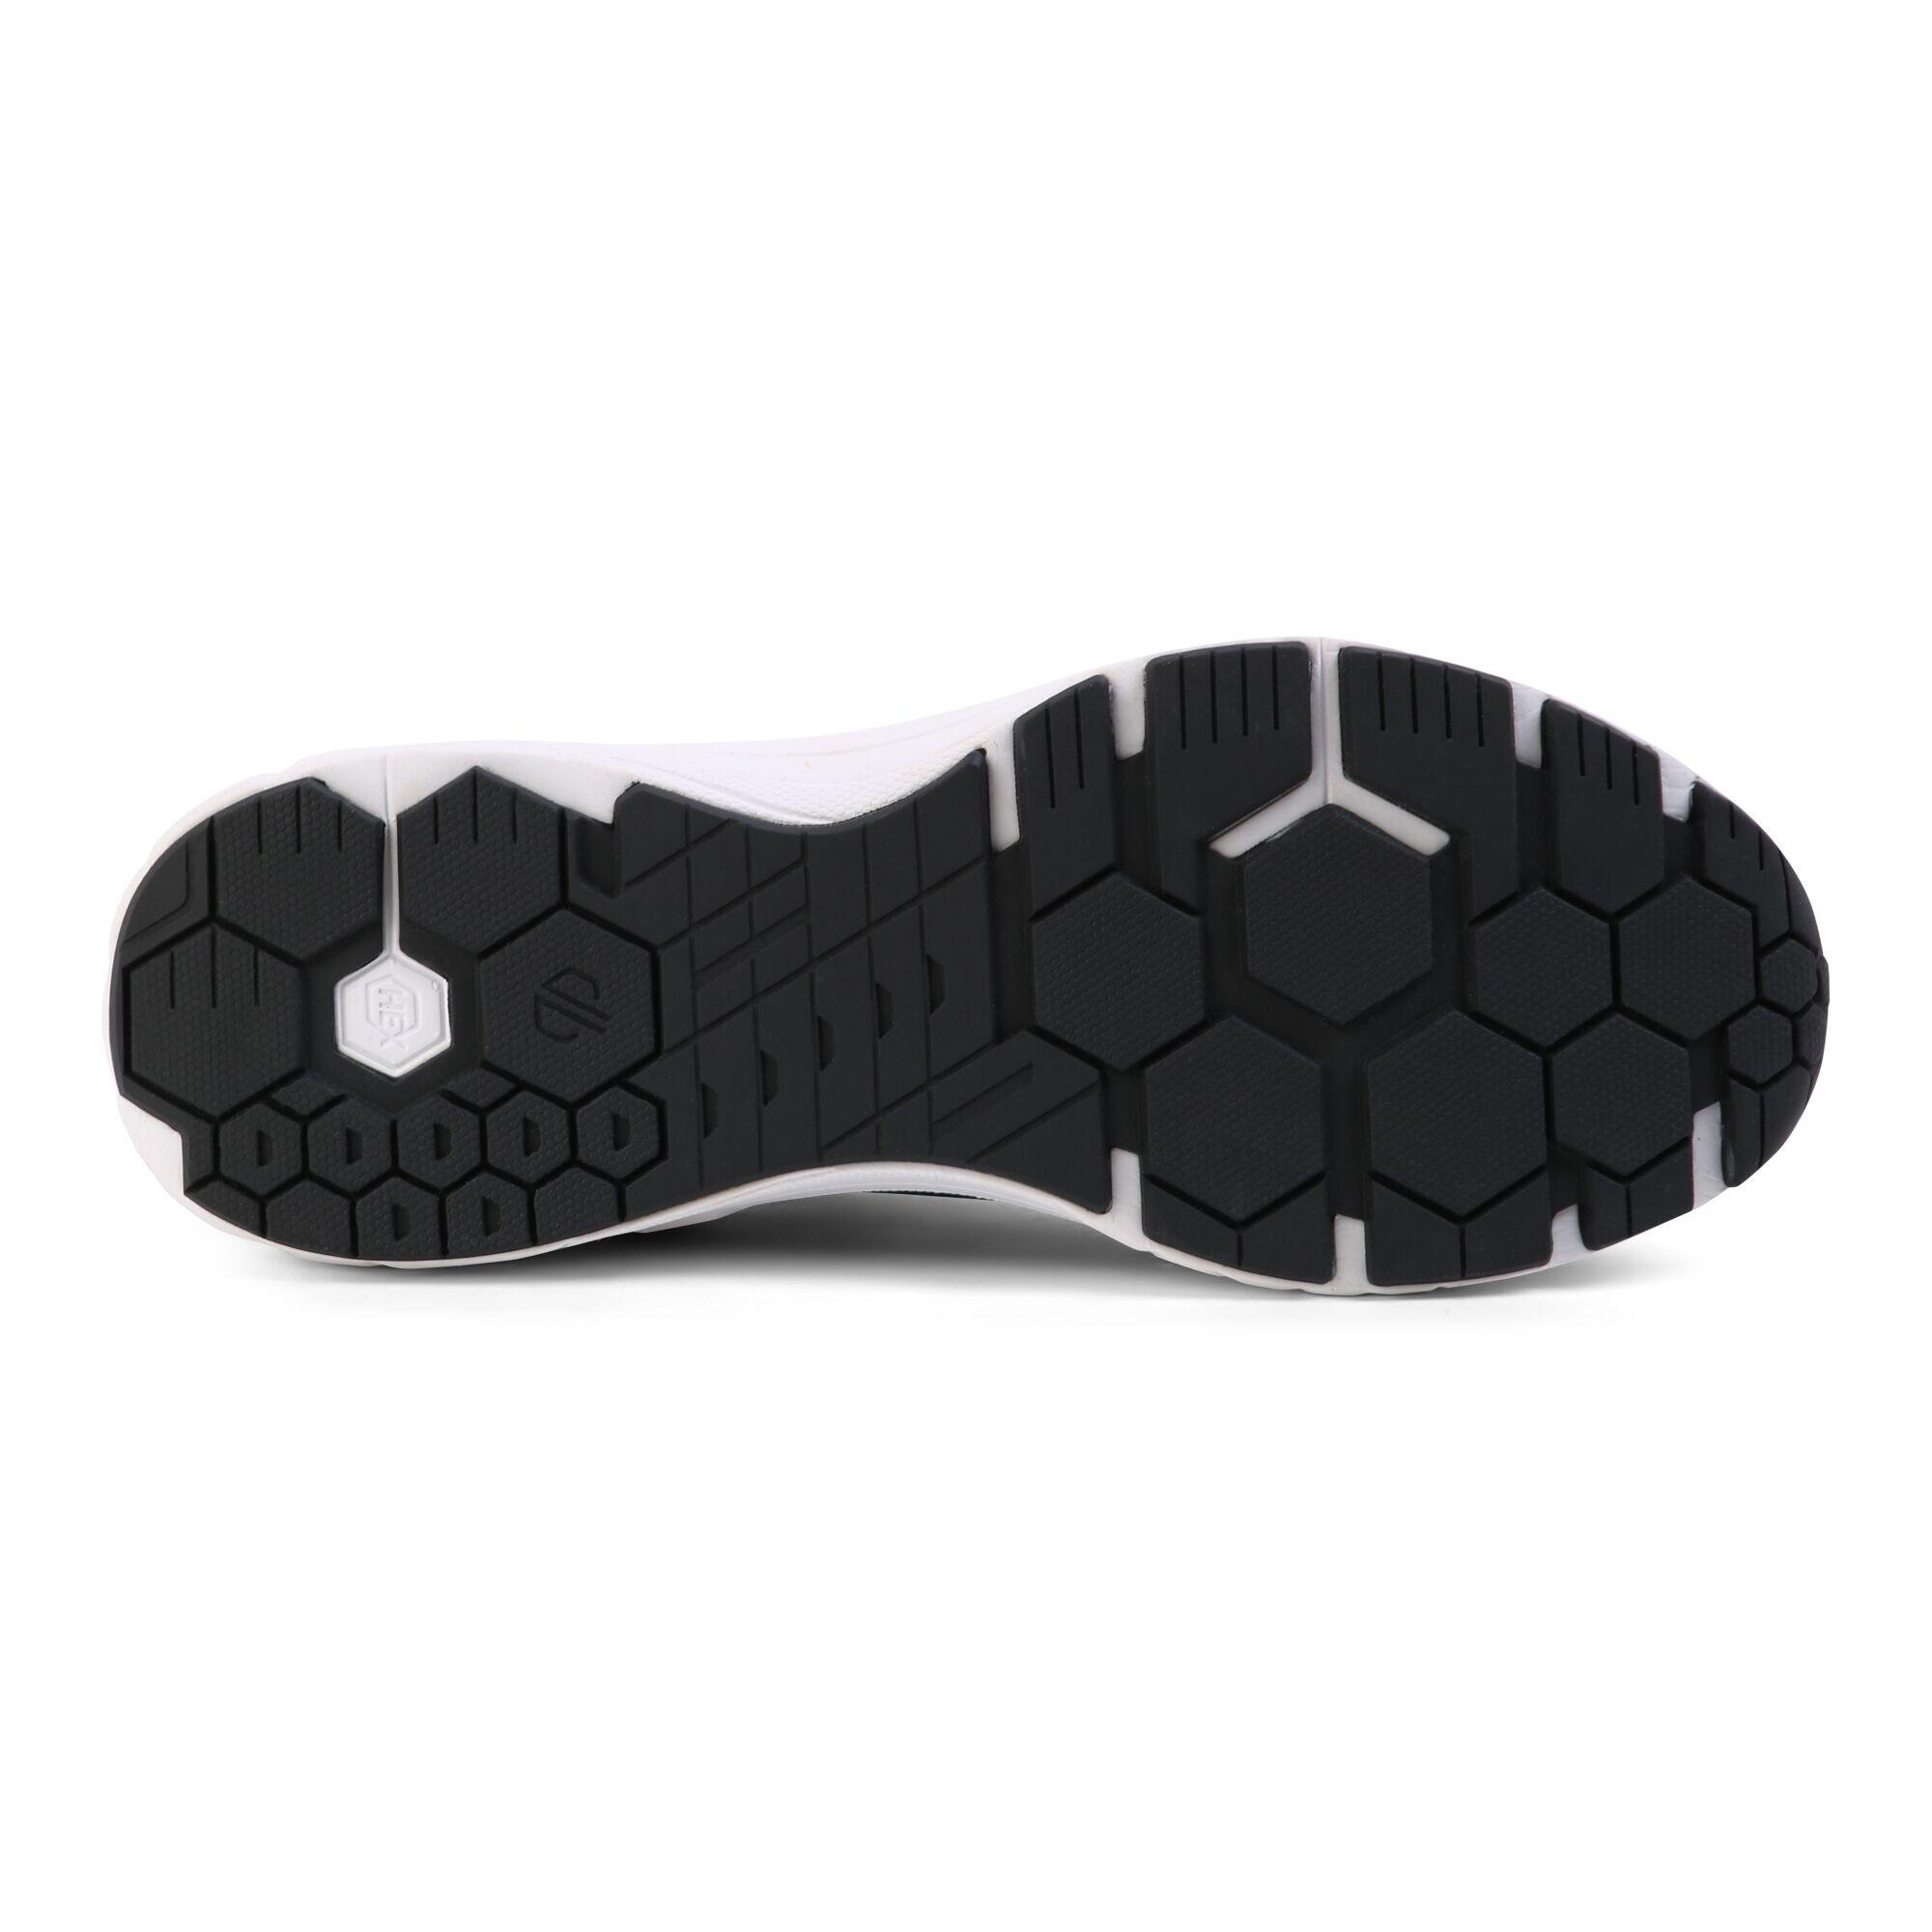 Mens Hex Rapid Performance Trainers (Black/White) 4/5